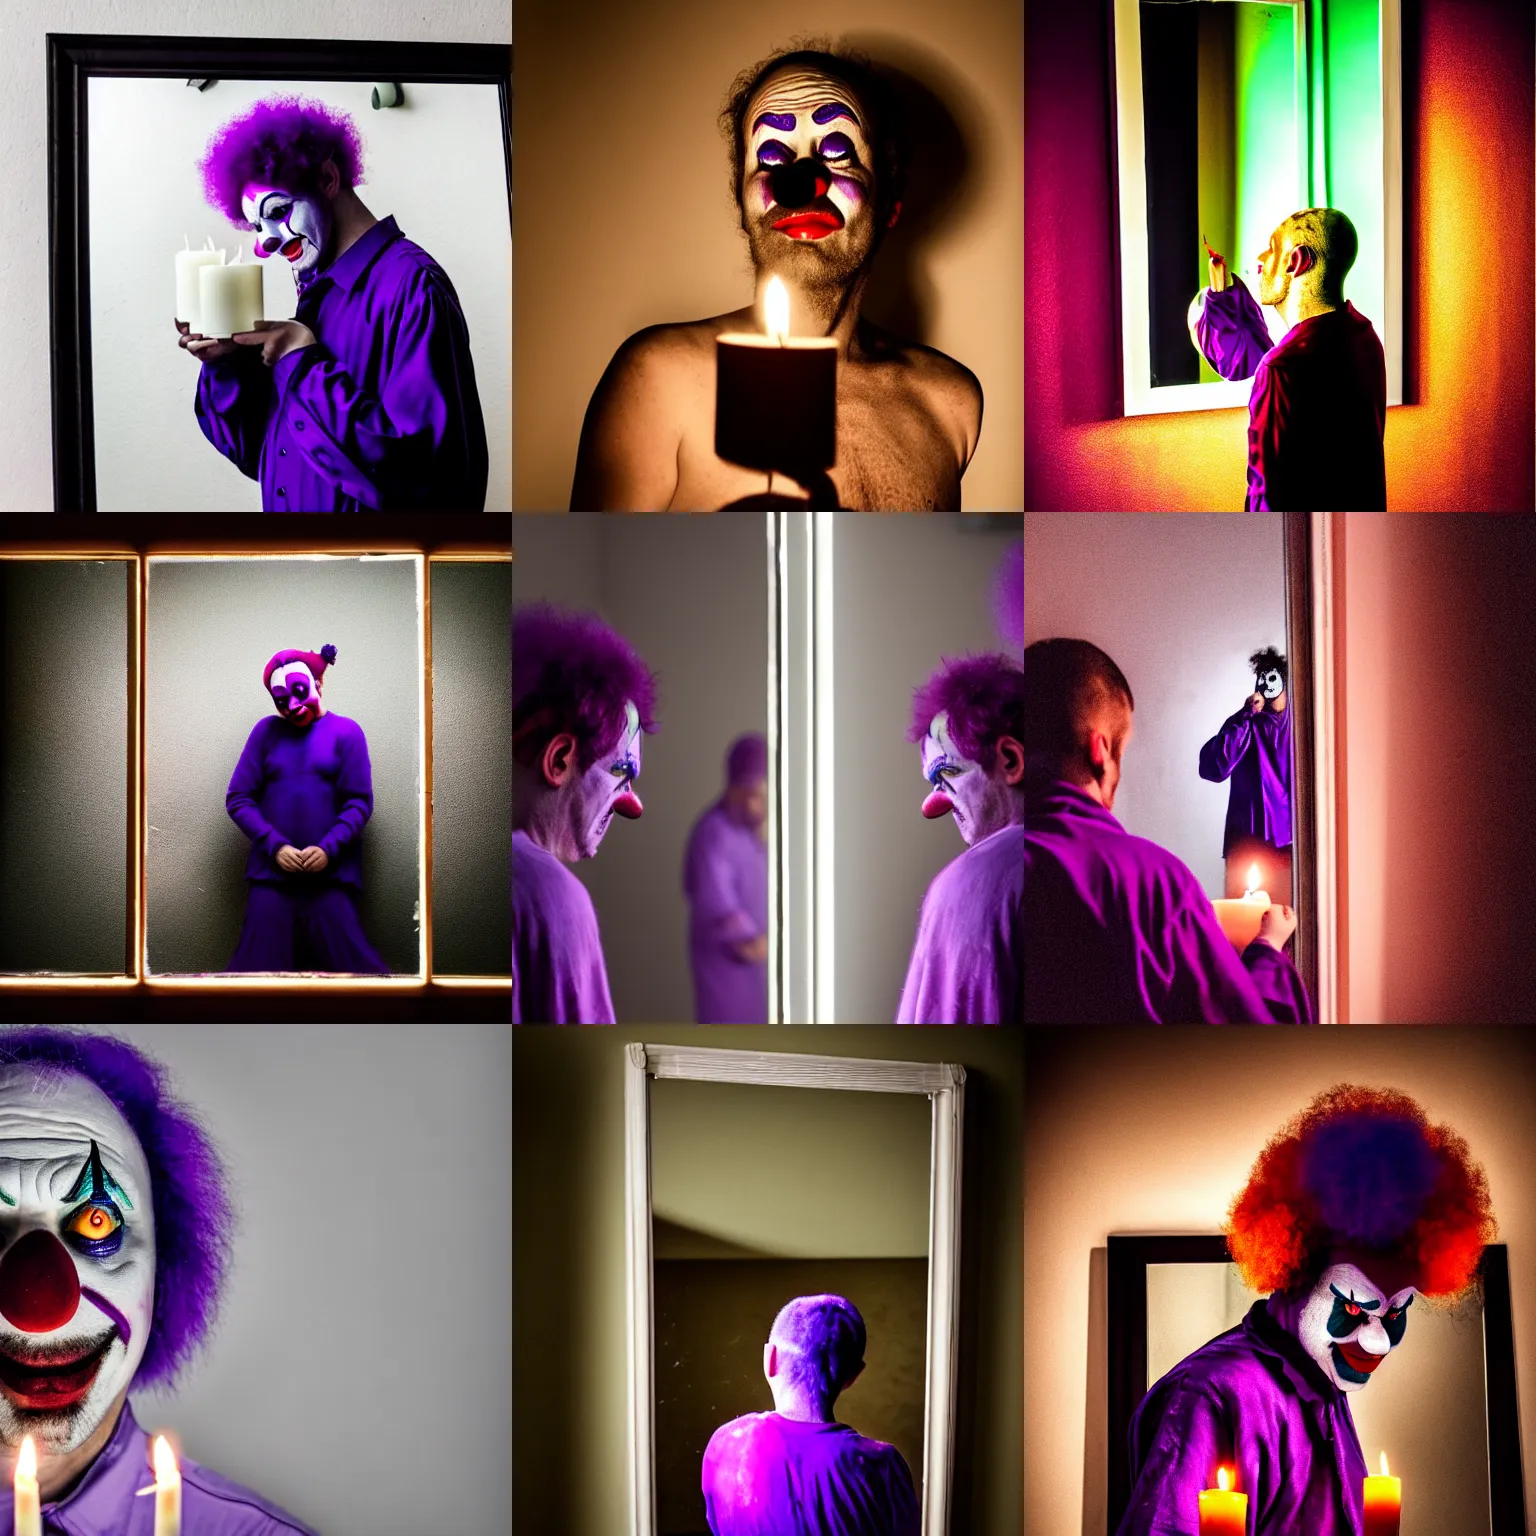 Prompt: a clown dressed in purple looking at himself in a mirror. the clown is holding a candle. the mirror is cracked broken mirror shattered. dark moody natural lighting